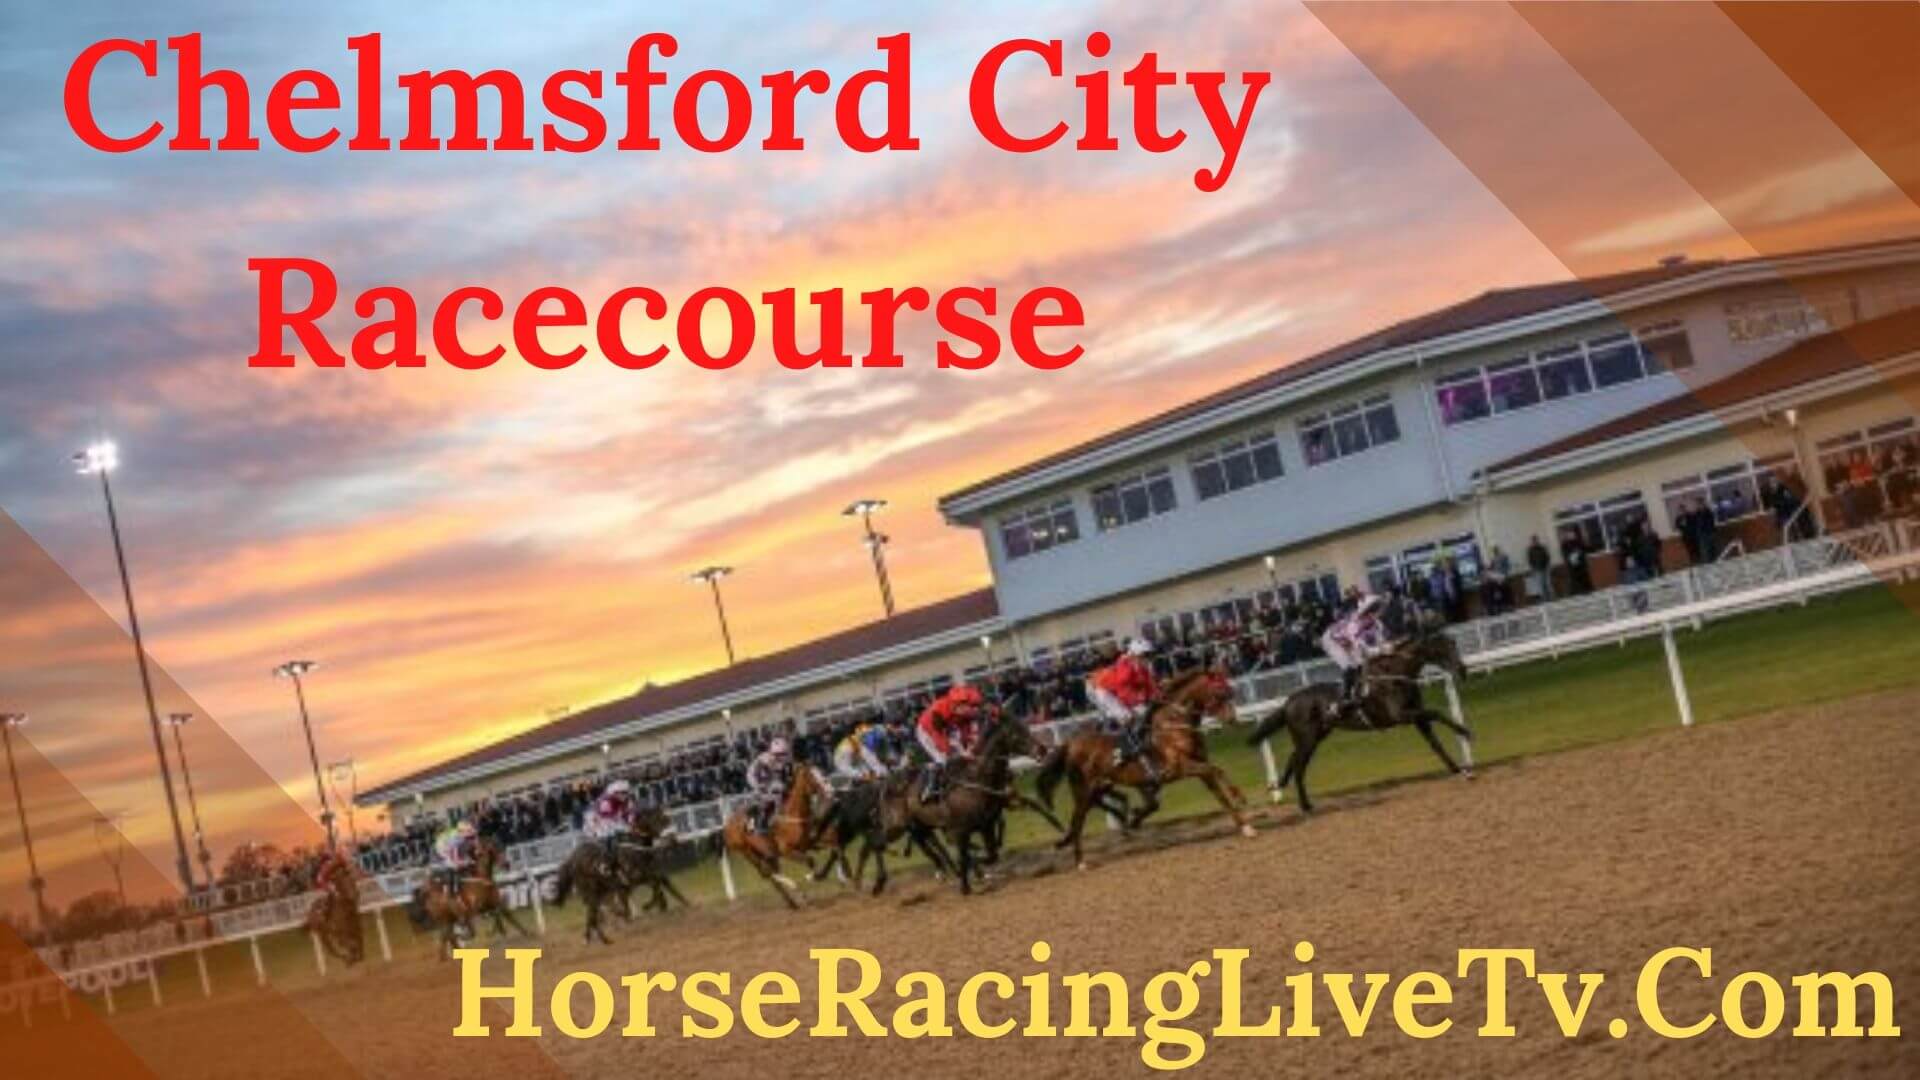 Chelmsford City tote.co.uk Back Tomorrow with Handicap 6 20200617